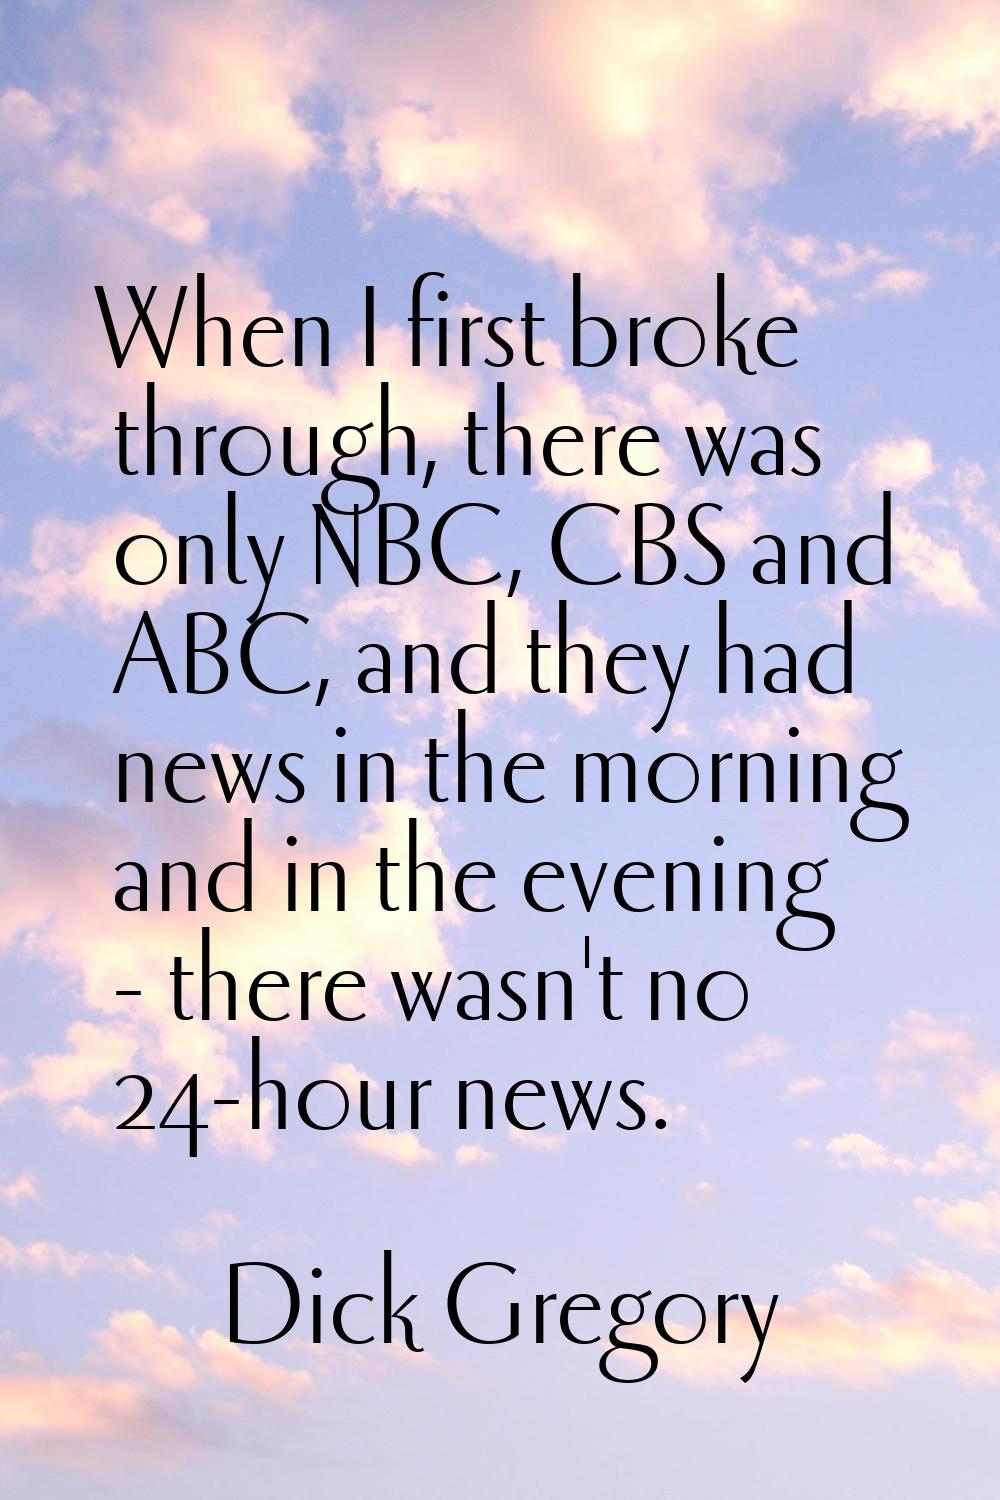 When I first broke through, there was only NBC, CBS and ABC, and they had news in the morning and i